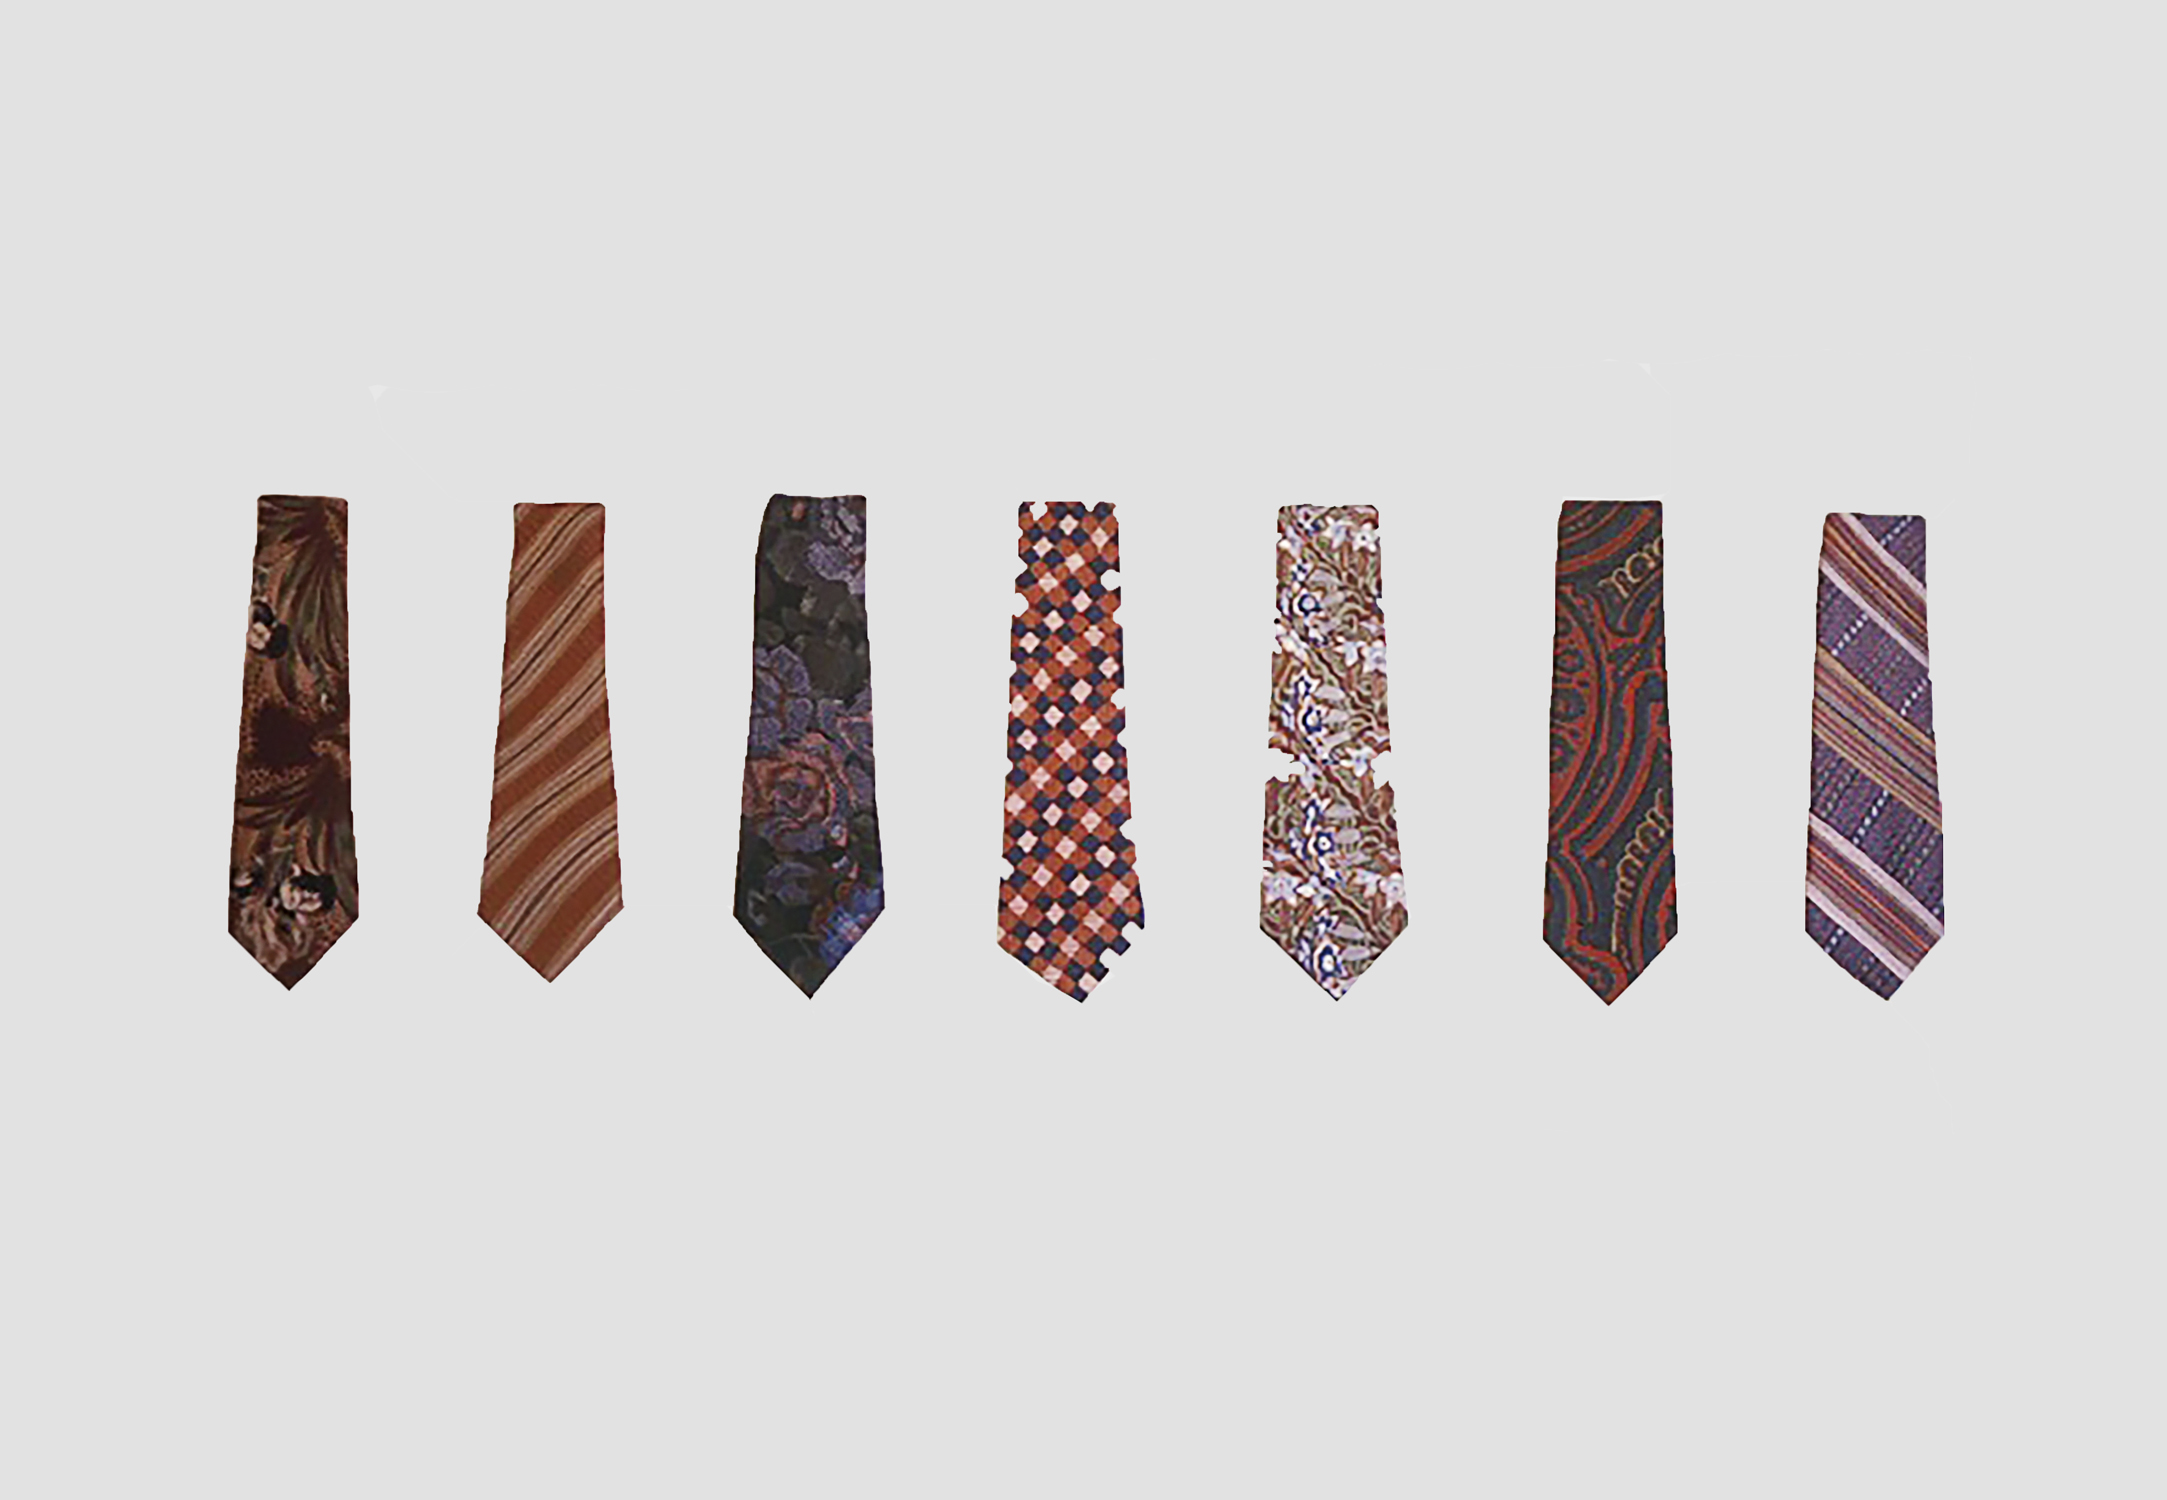  Seven Patterned Ties, 97 x 28”, 1978 